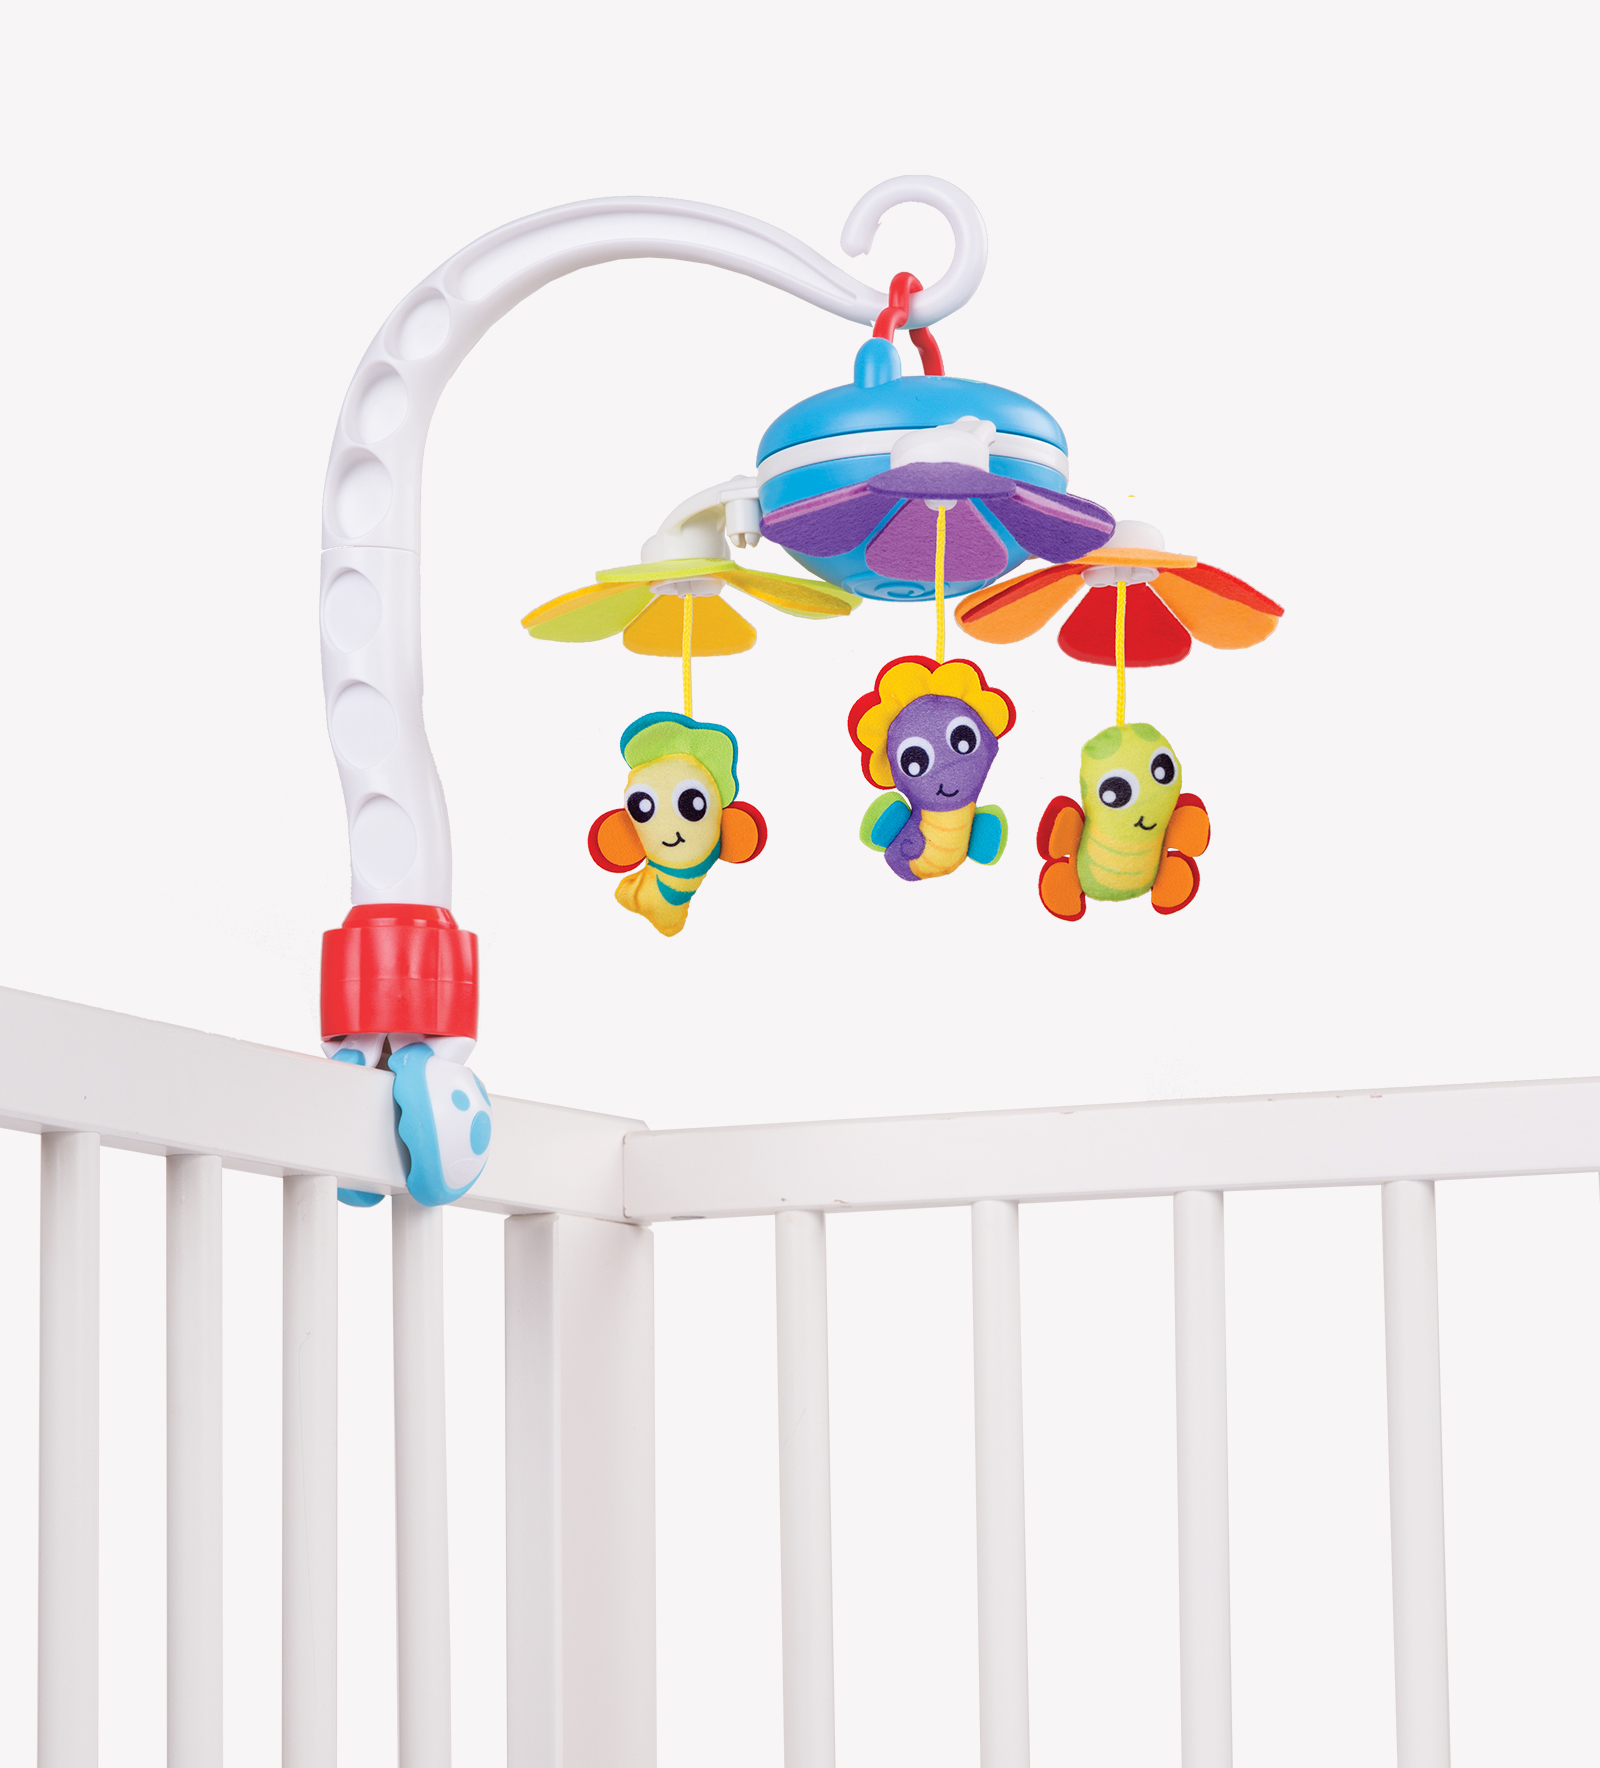 40189 On the go or at home From 0 Months Playgro Musical Travel Mobile With 3 different Melodies Multicoloured